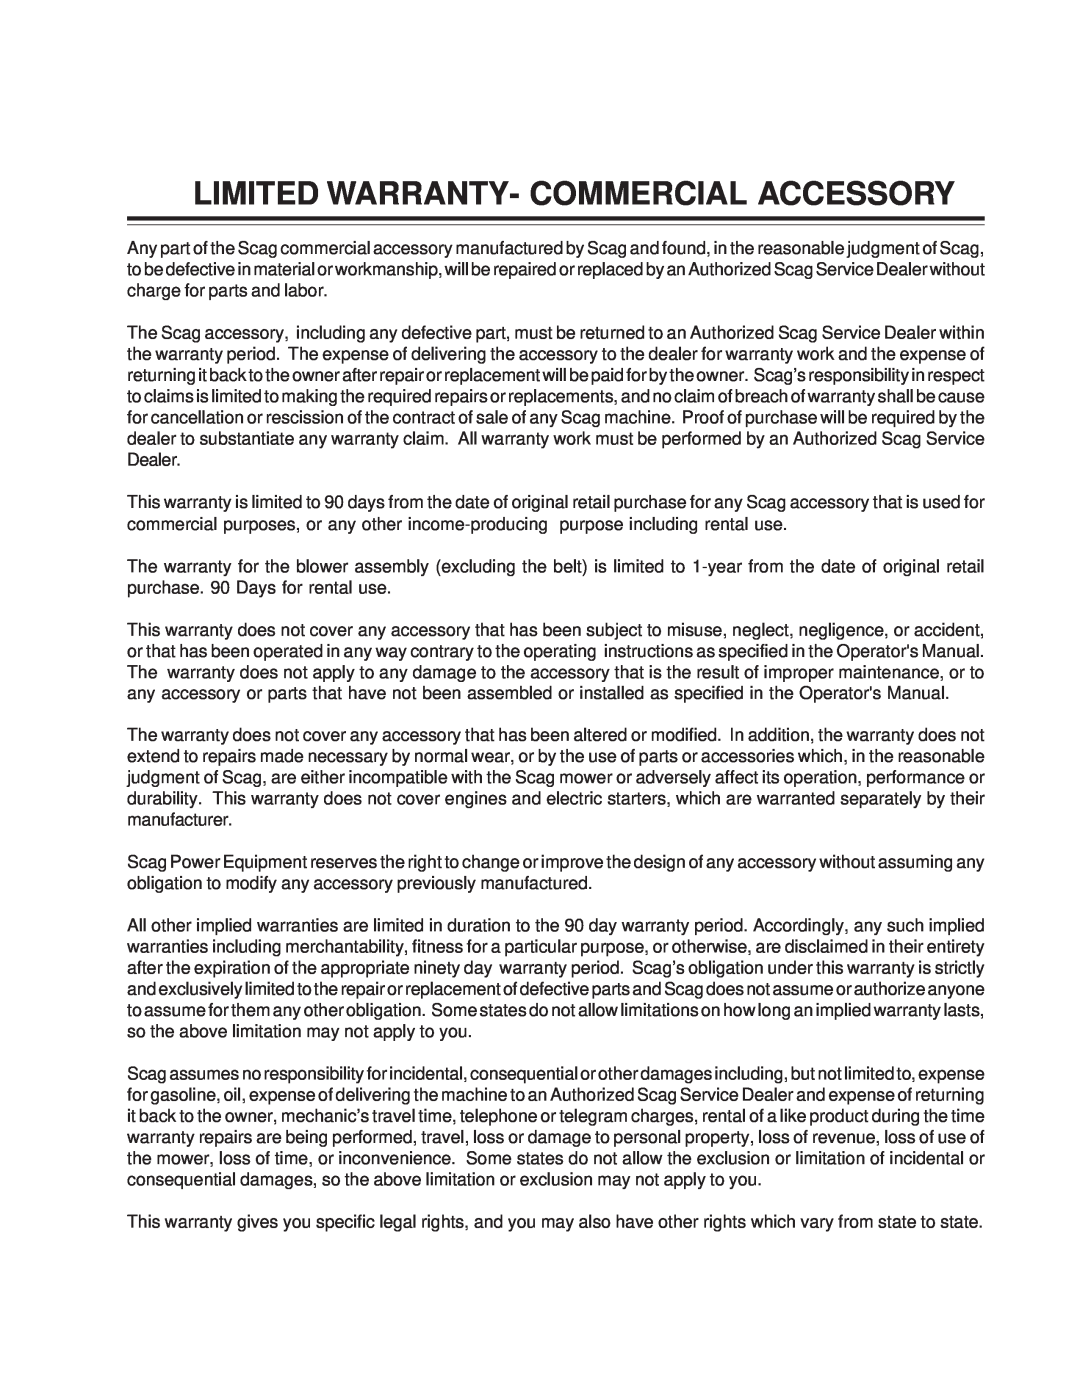 Scag Power Equipment GC-STC-V operating instructions Limited Warranty- Commercial Accessory 